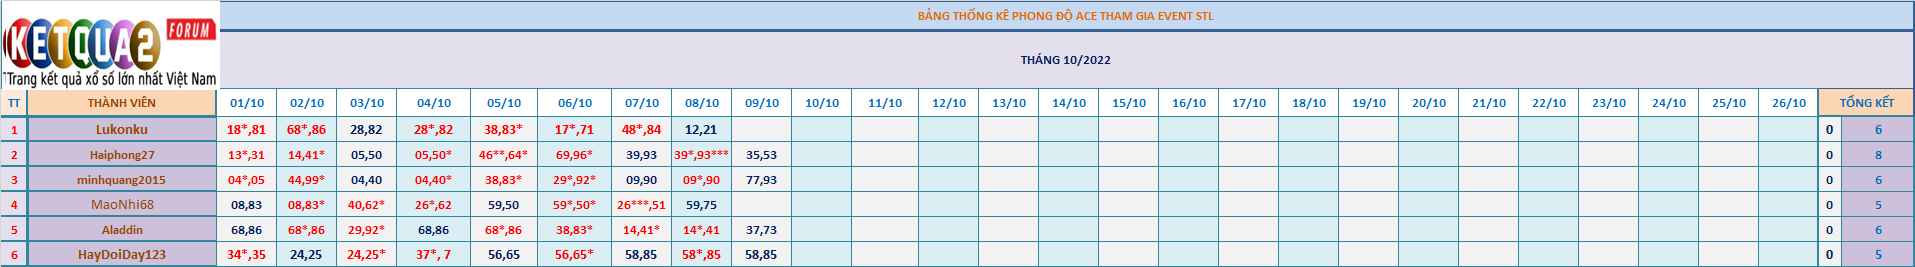 event thao luan.png